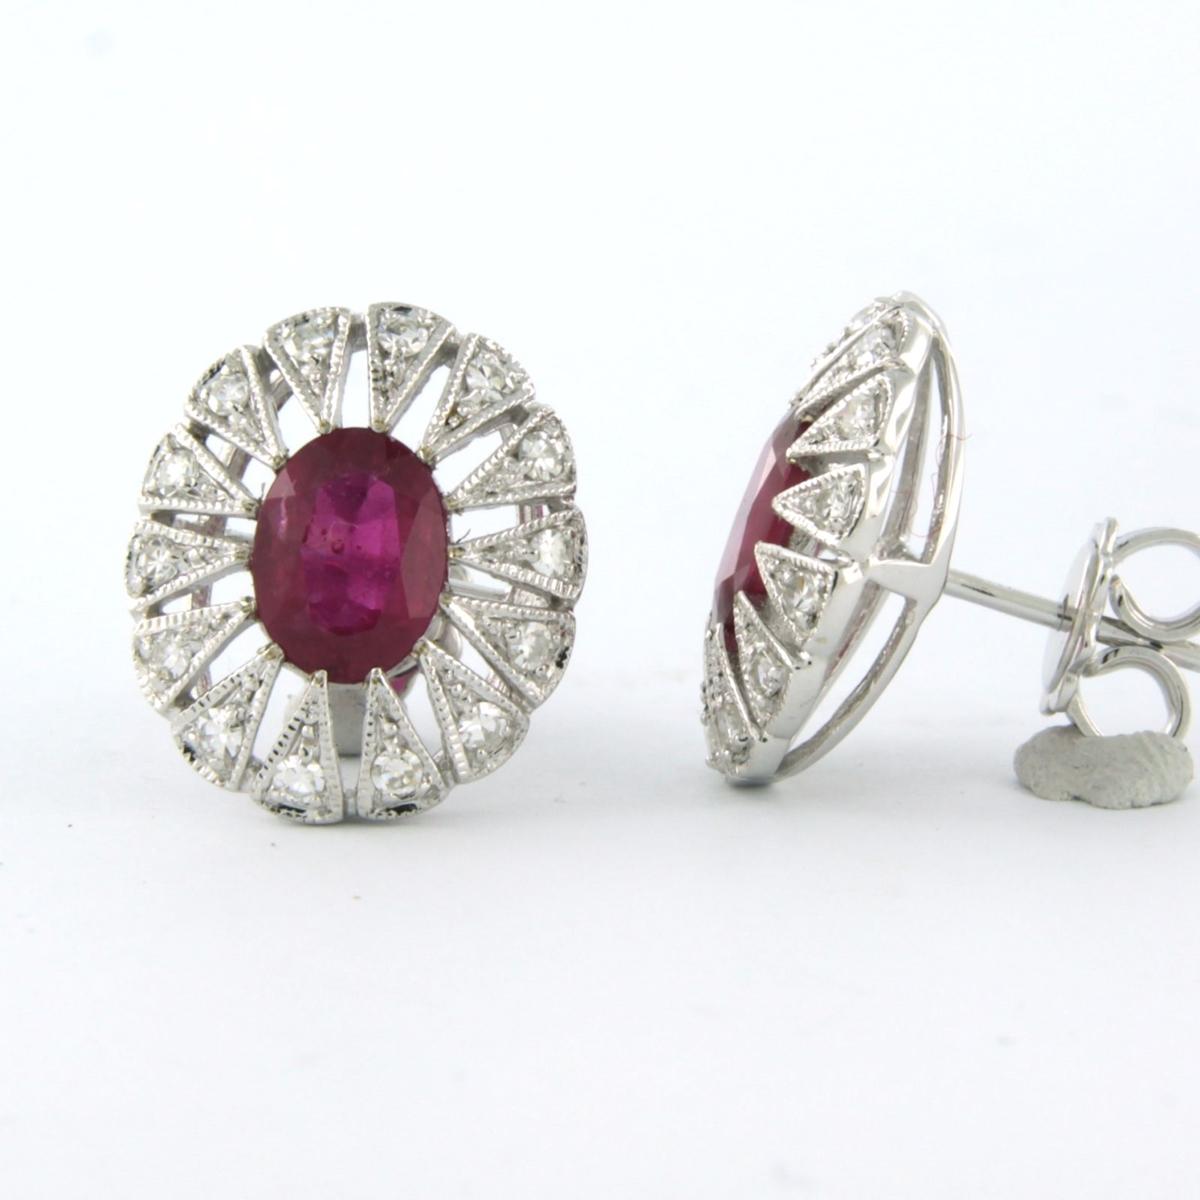 Modern 14 kt gold earrings set with ruby 2.90 carat and single cut diamond total 0.48ct For Sale